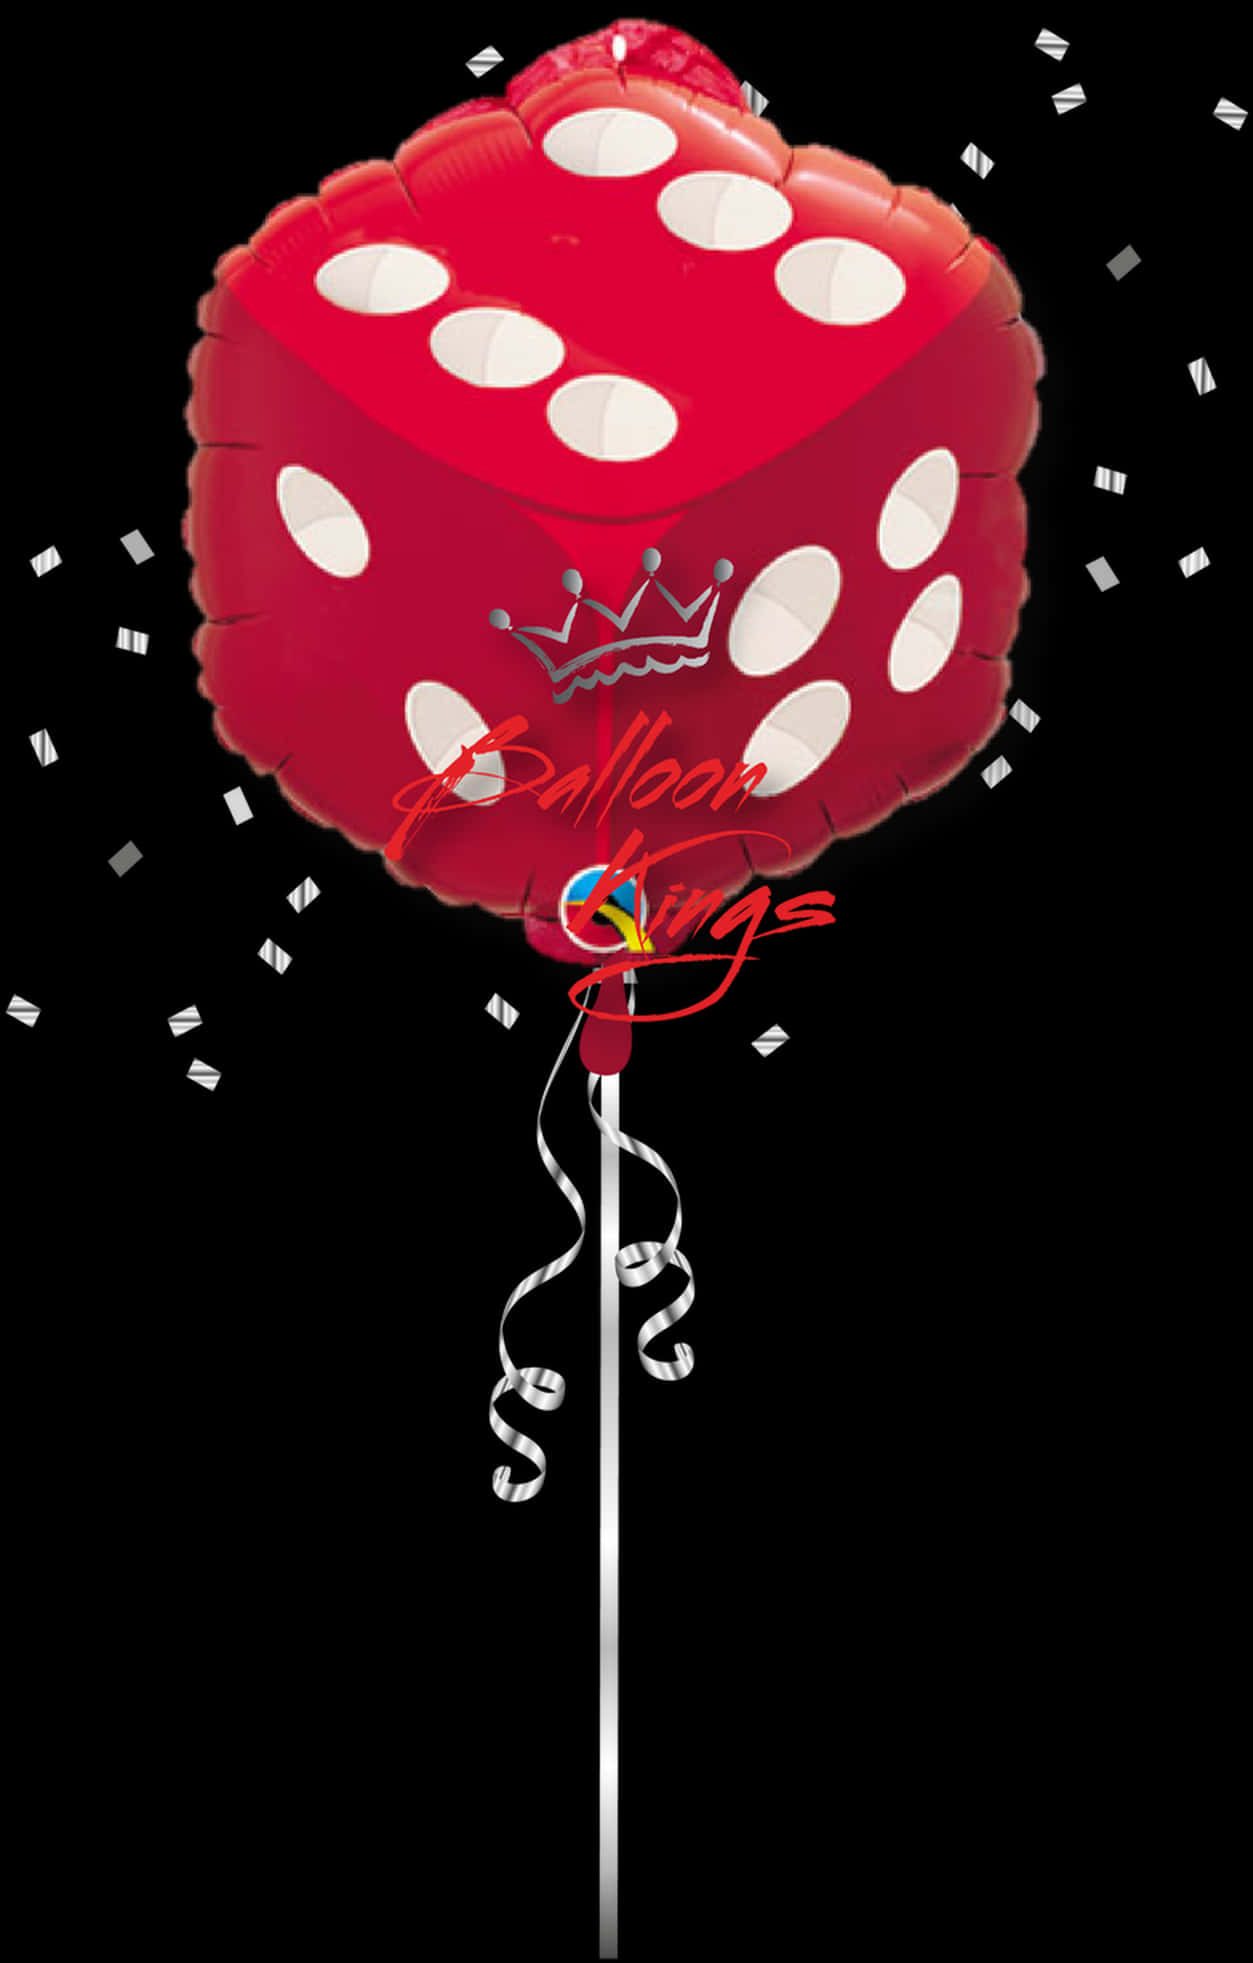 A Red Dice Balloon With White Dots